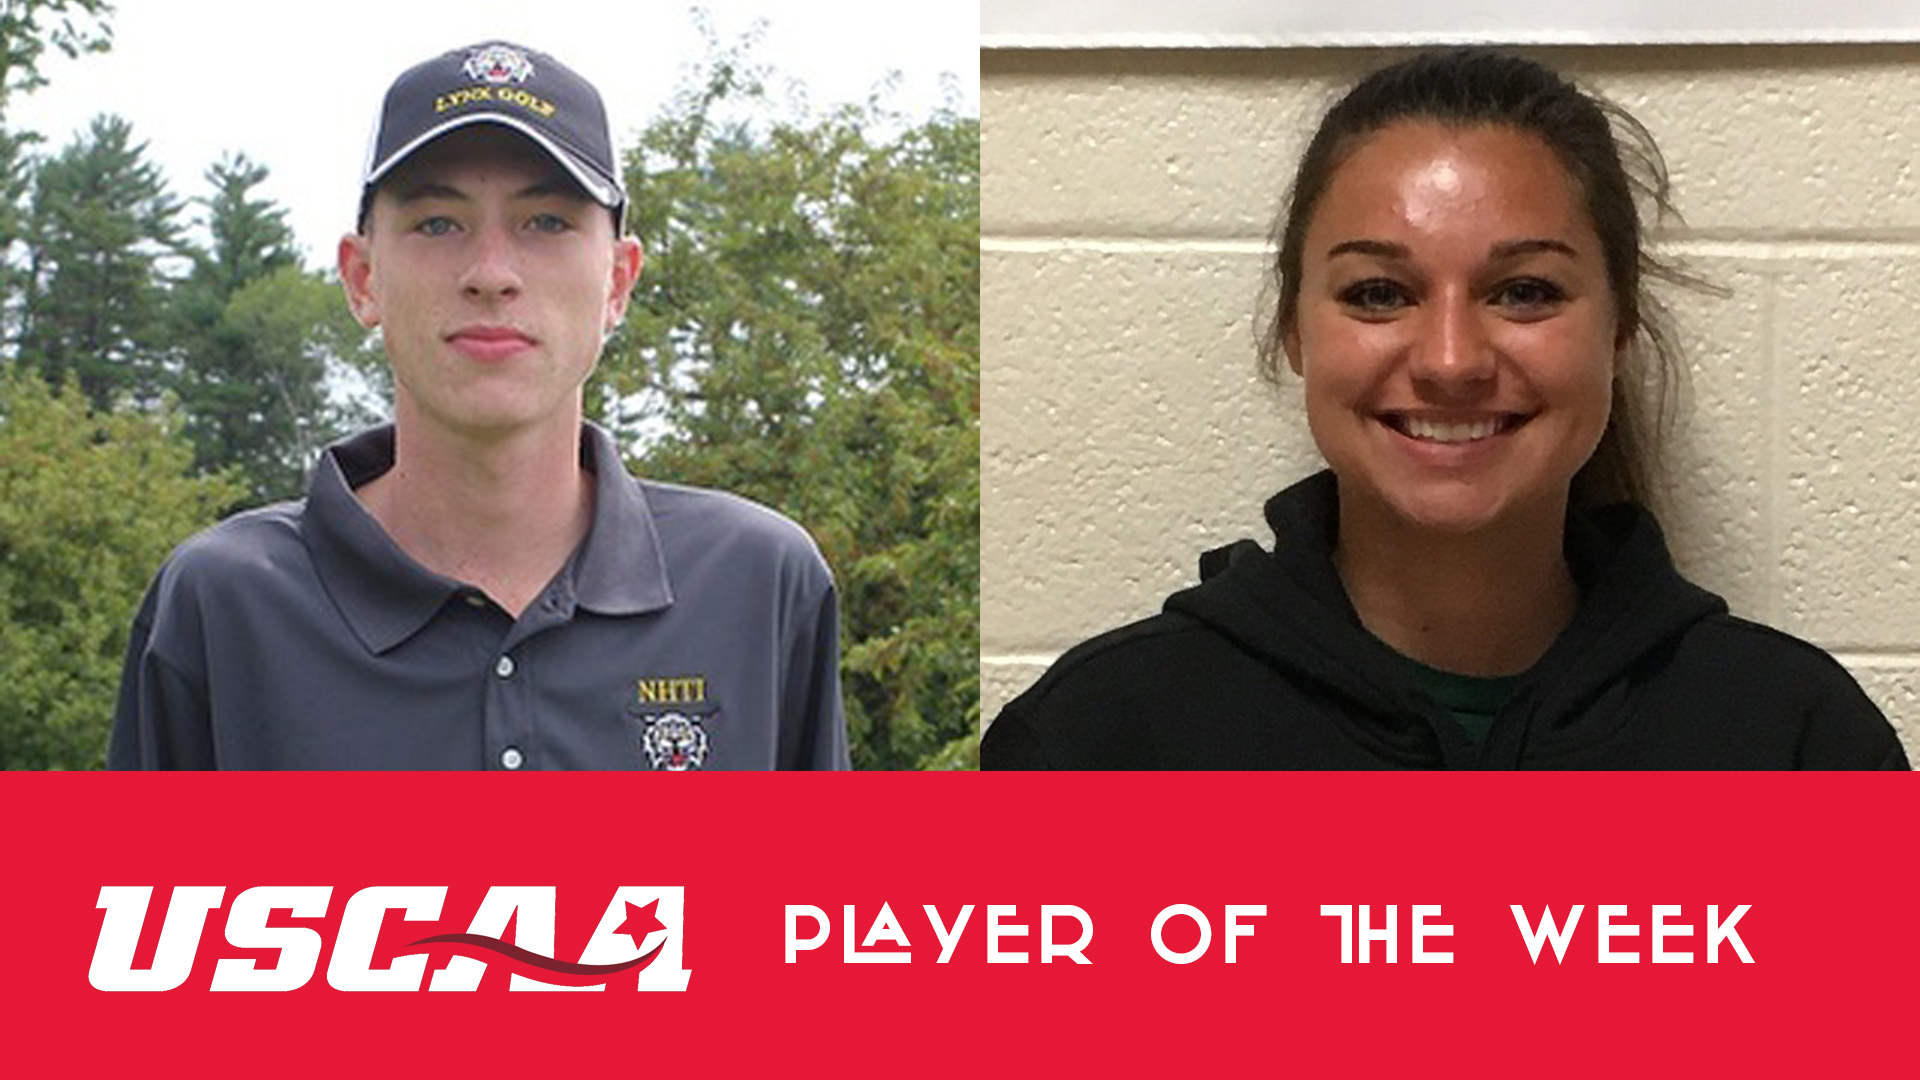 YSCAA has two repeat USCAA Player of the Week winners